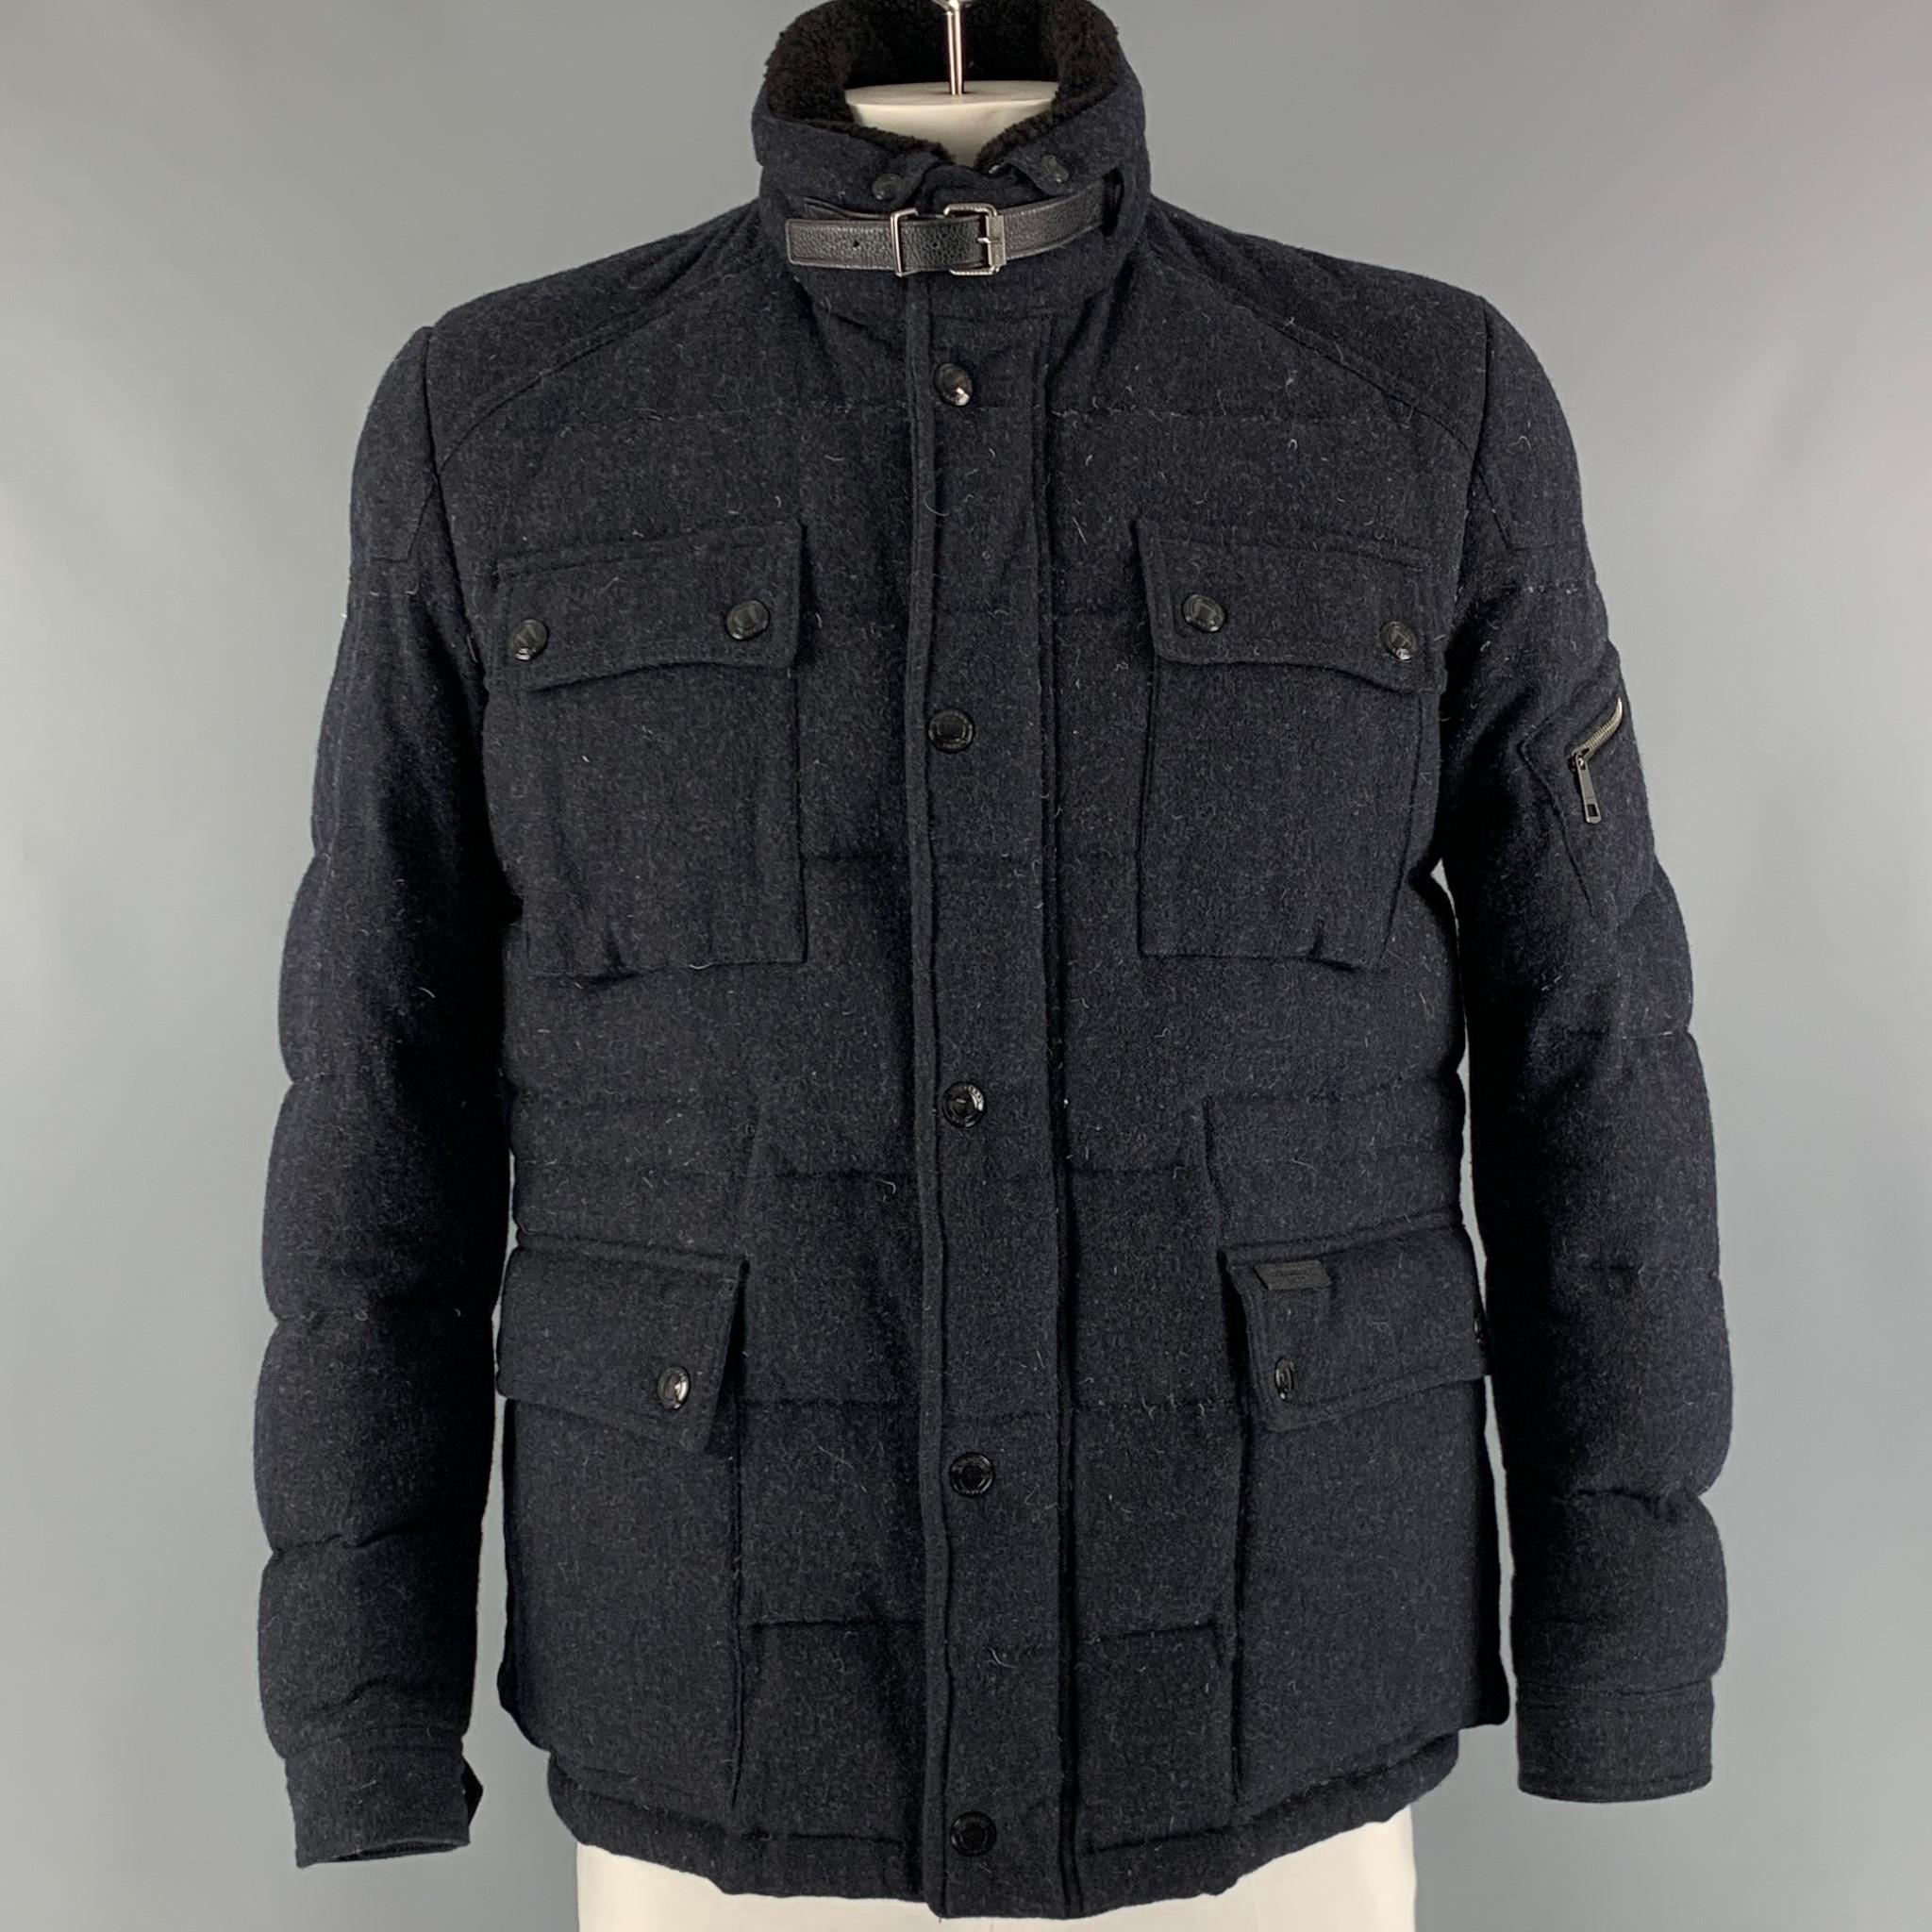 BURBERRY BRIT coat comes in a navy wool and polyamide fleece material with a plaid lining featuring a quilted style, detachable collar, flap pockets, and a  zip up closure.

Very Good Pre-Owned Condition. Minor mark at left back shoulder.
Marked: